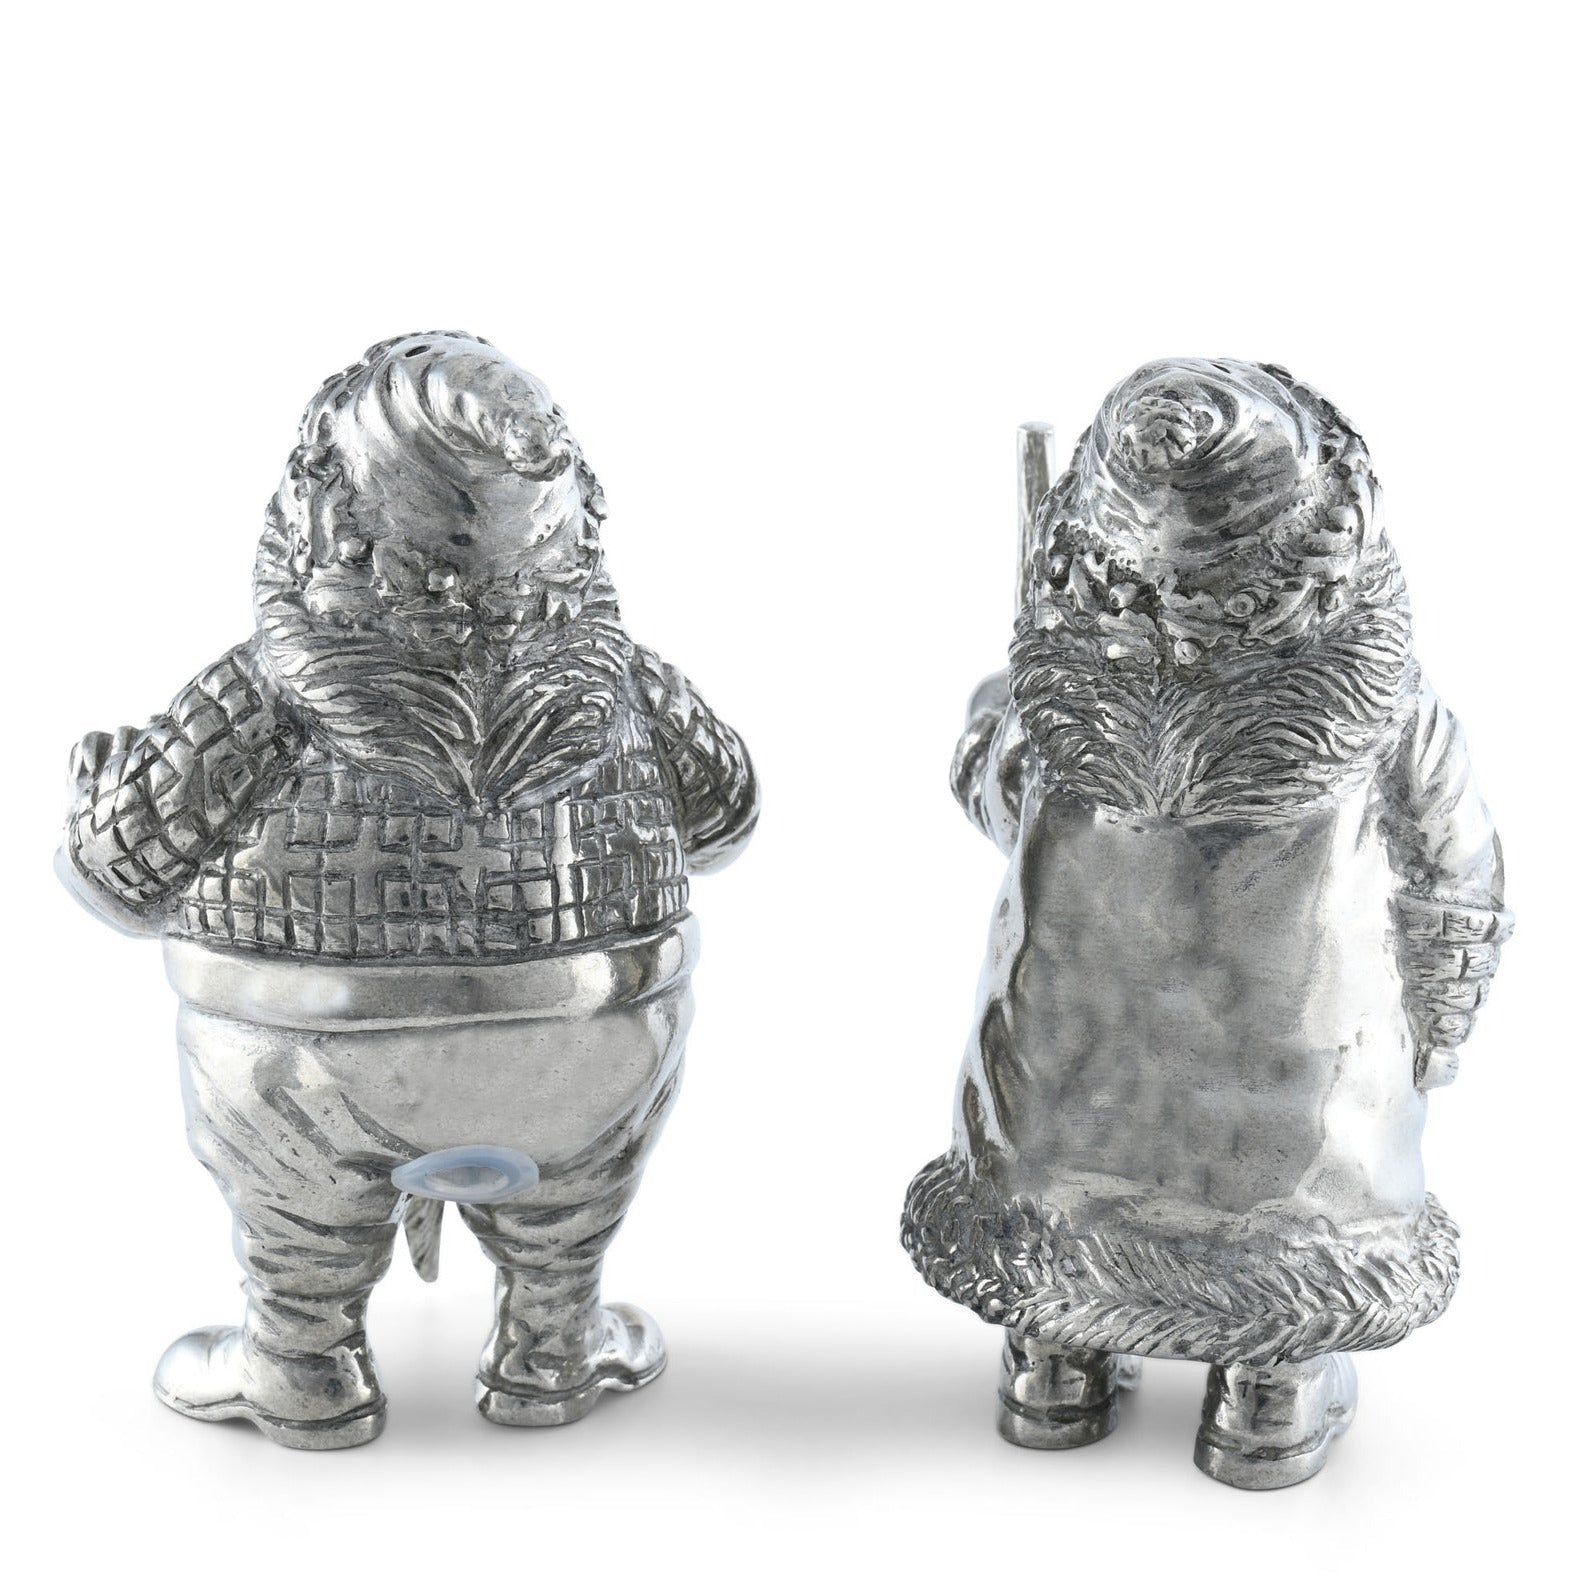 Pewter St Nick and Santa Salt and Pepper Timothy De Clue Collection